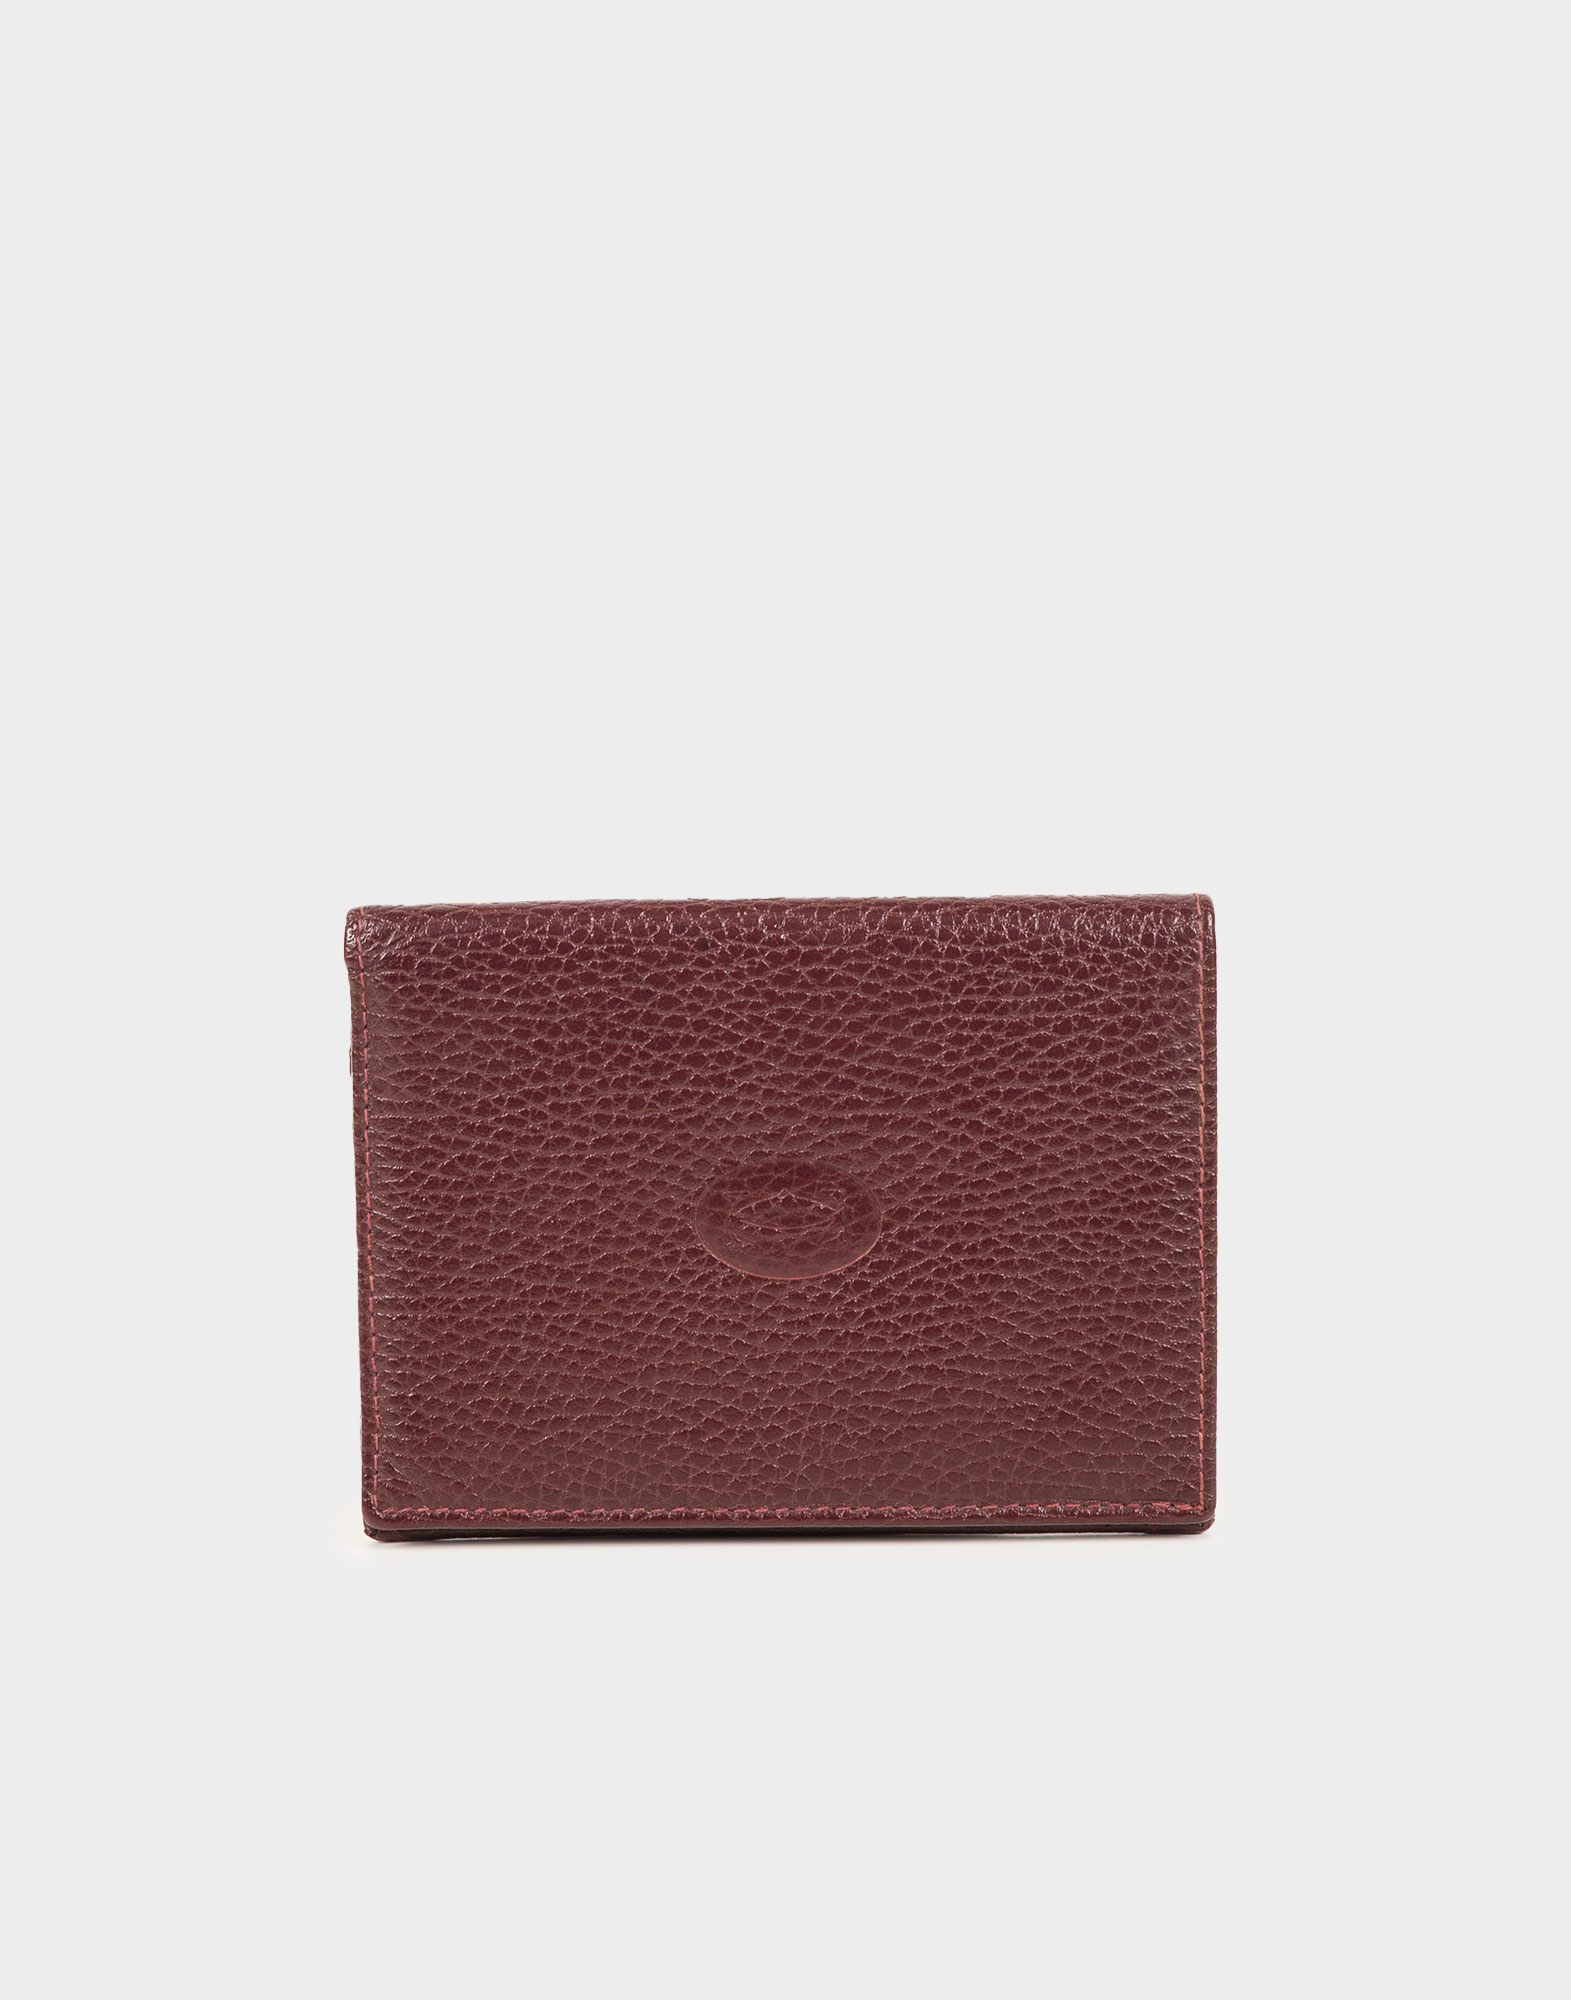 cartier card case in burgundy-coloured grained leather with embossed logo